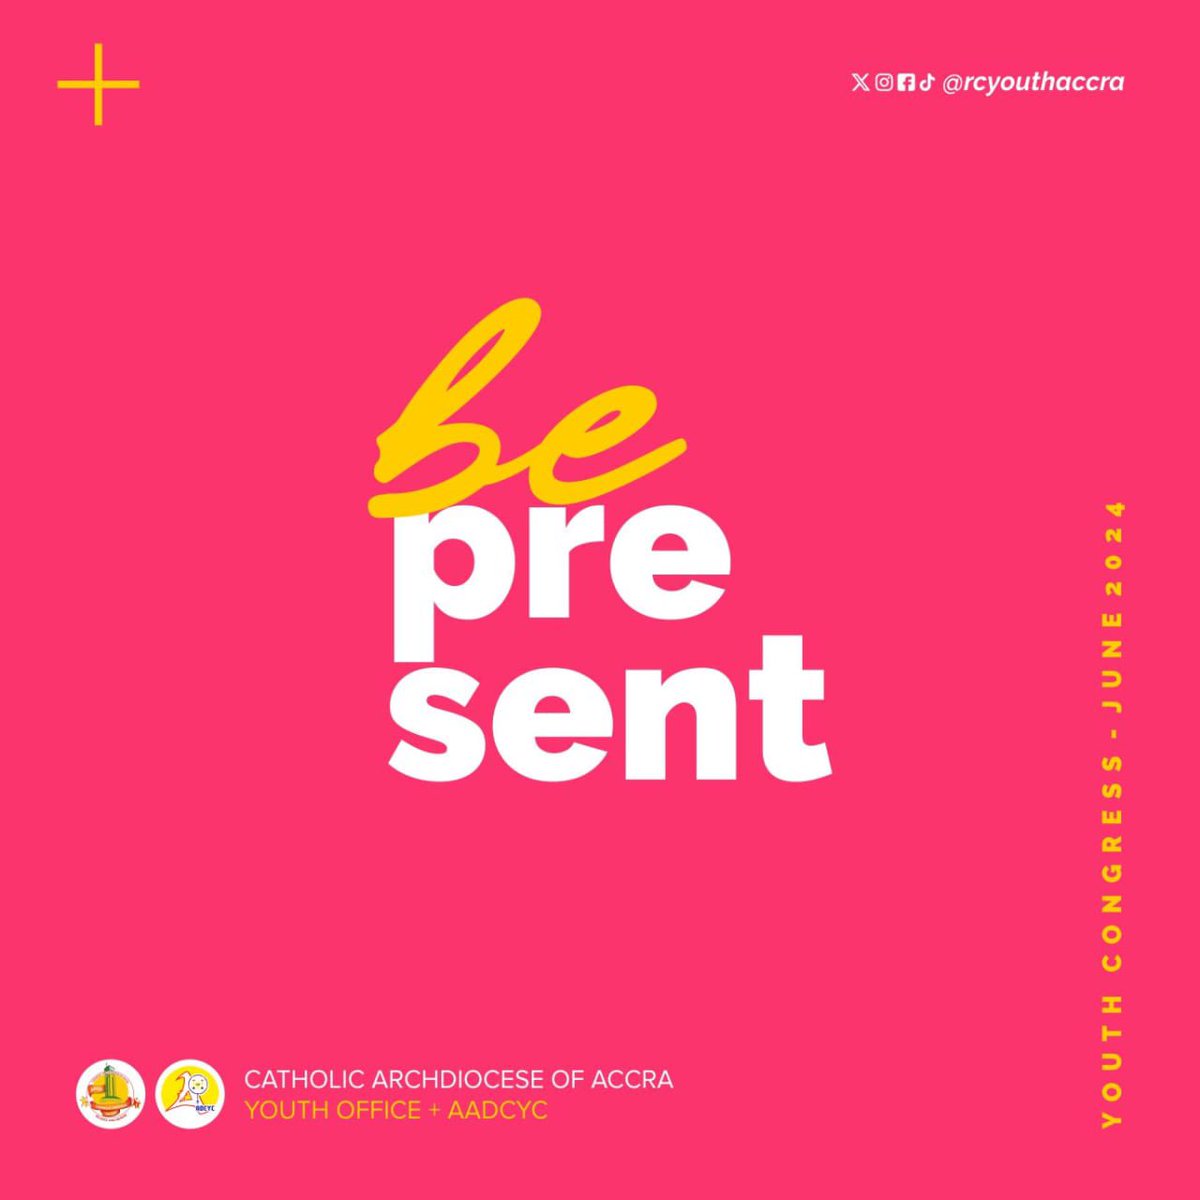 Let's embrace the beauty of being fully present.  

#beConnected #bePresent #beAgift #beToday #beCatholic